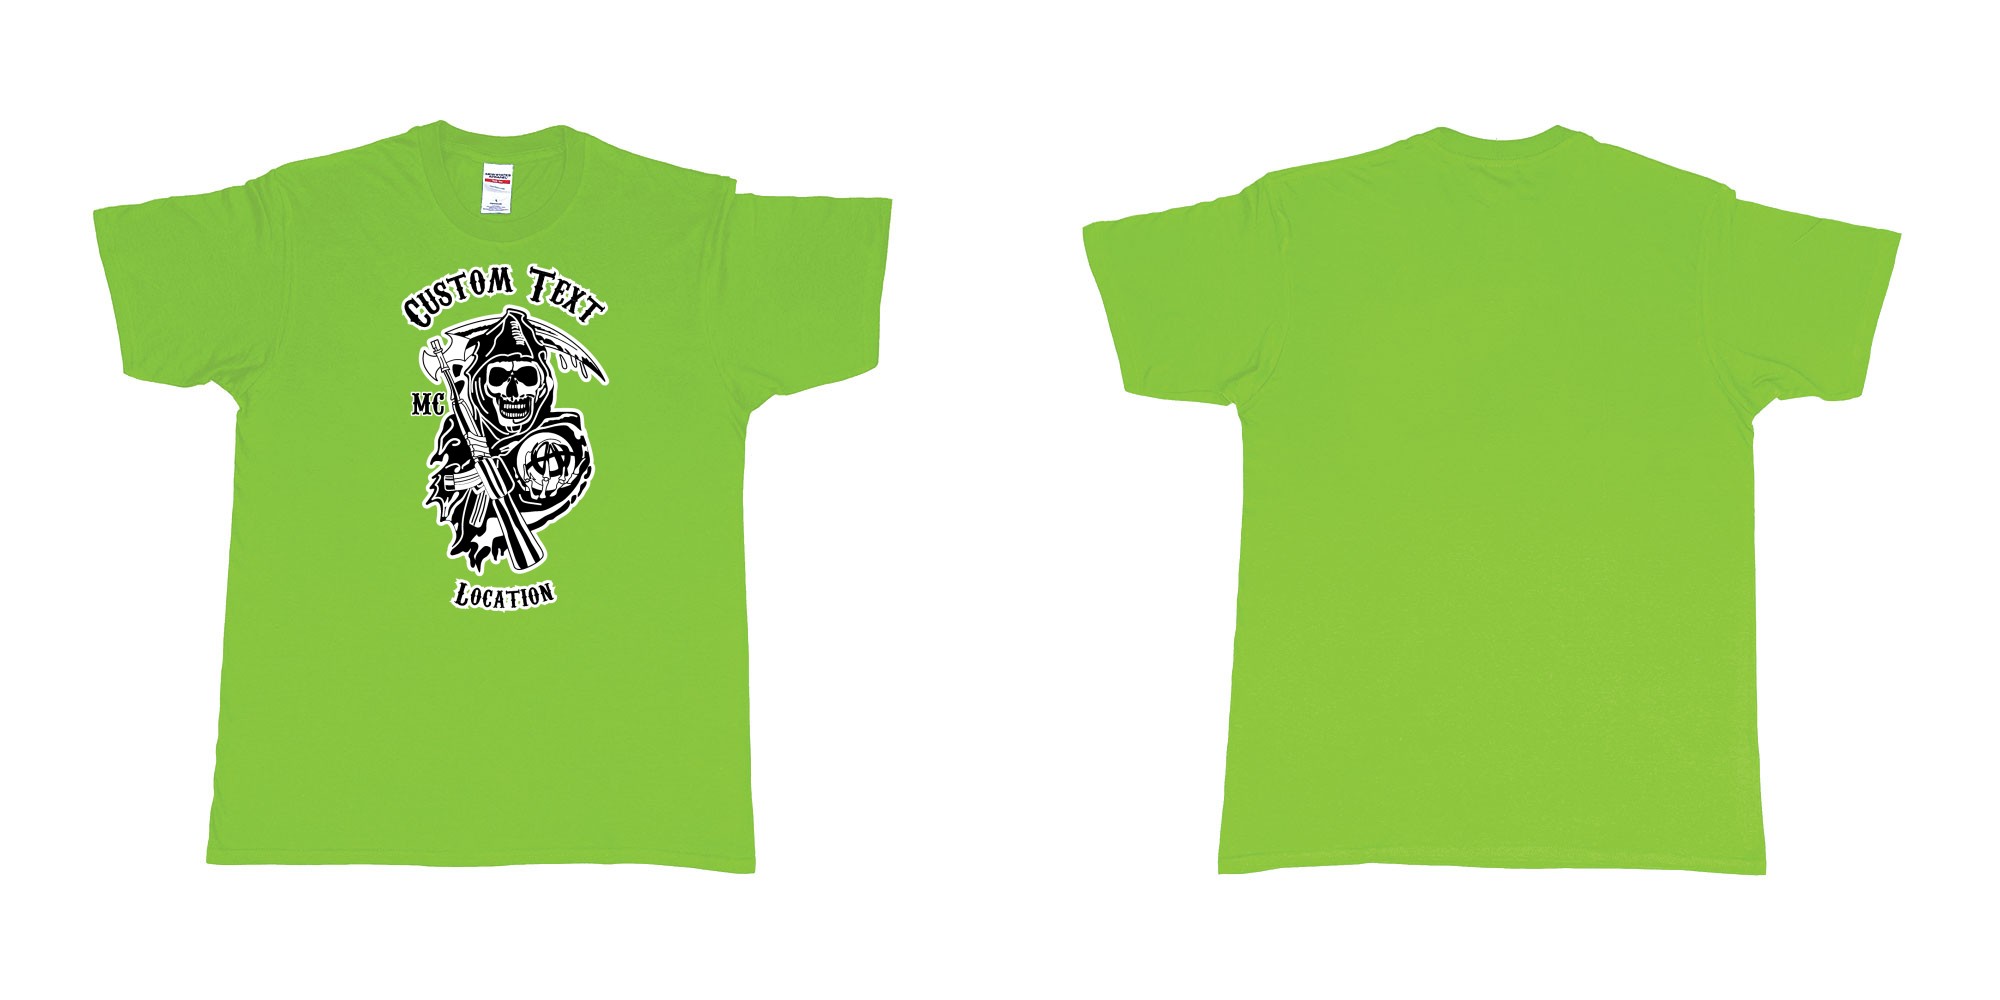 Custom tshirt design son of anarchy logo custom text in fabric color lime choice your own text made in Bali by The Pirate Way